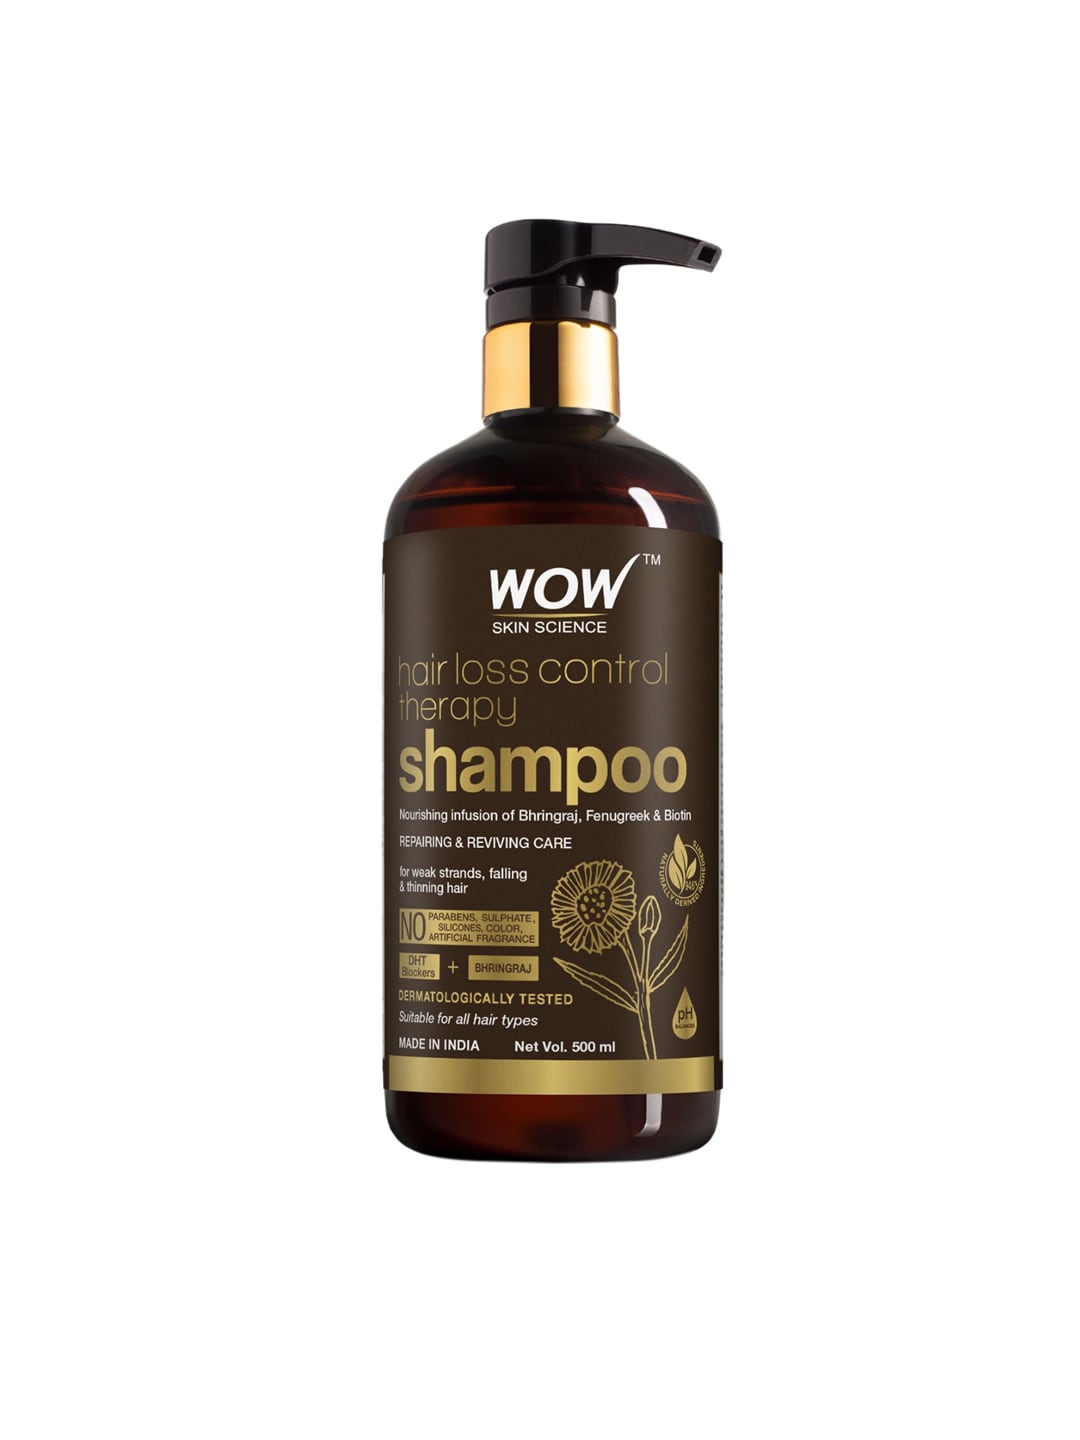 WOW SKIN SCIENCE Hair Loss Control Therapy Shampoo - 500 ml Price in India